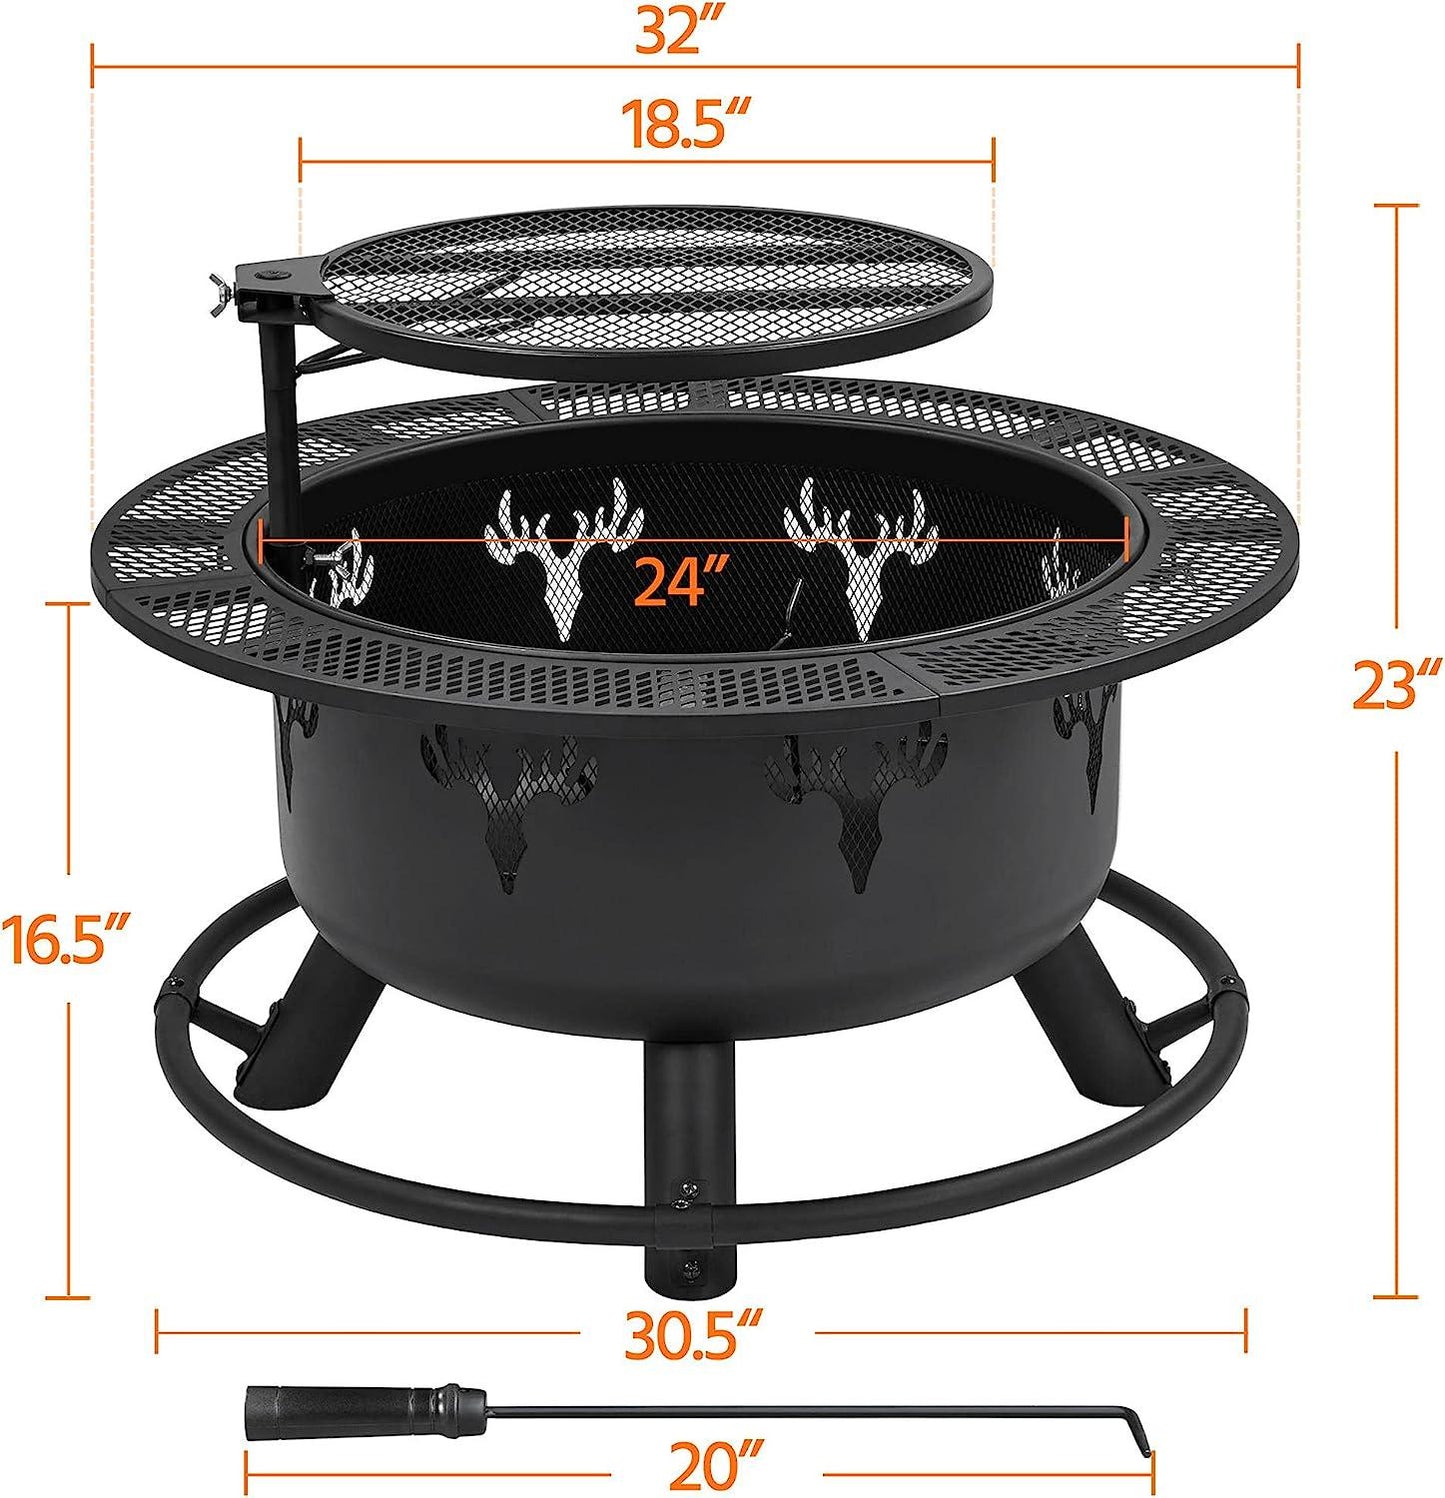 32in Fire Pit Outdoor Wood Burning Firepits Outdoor Fireplace with 18.5 Inch Swivel Cooking Grill Grate and Poker Fire Bowl for Camping, Backyard, BBQ, Garden, Bonfire